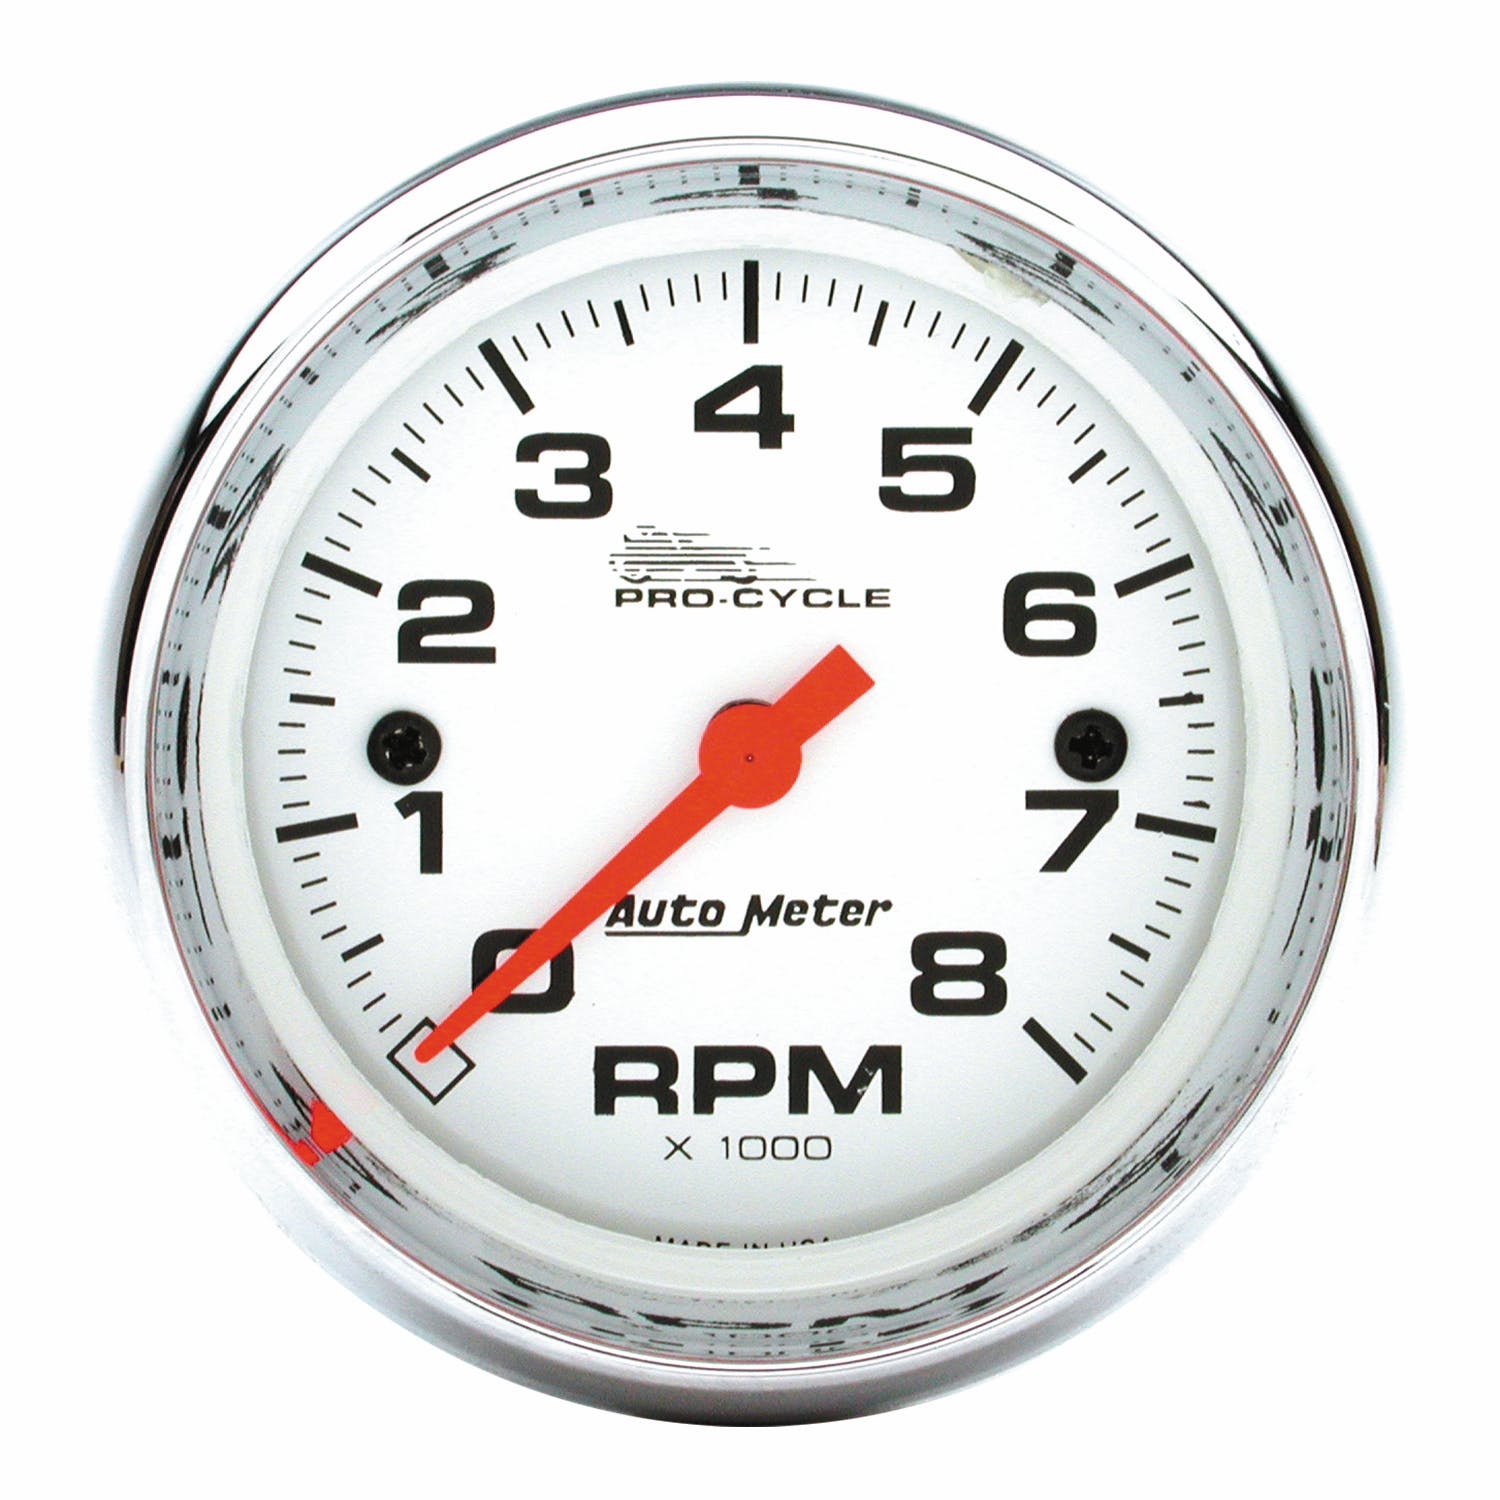 AutoMeter Products 19305 Tachometer Gauge, White-Pro Cycle 2 5/8, 8K RPM, 2and4 Cylinder